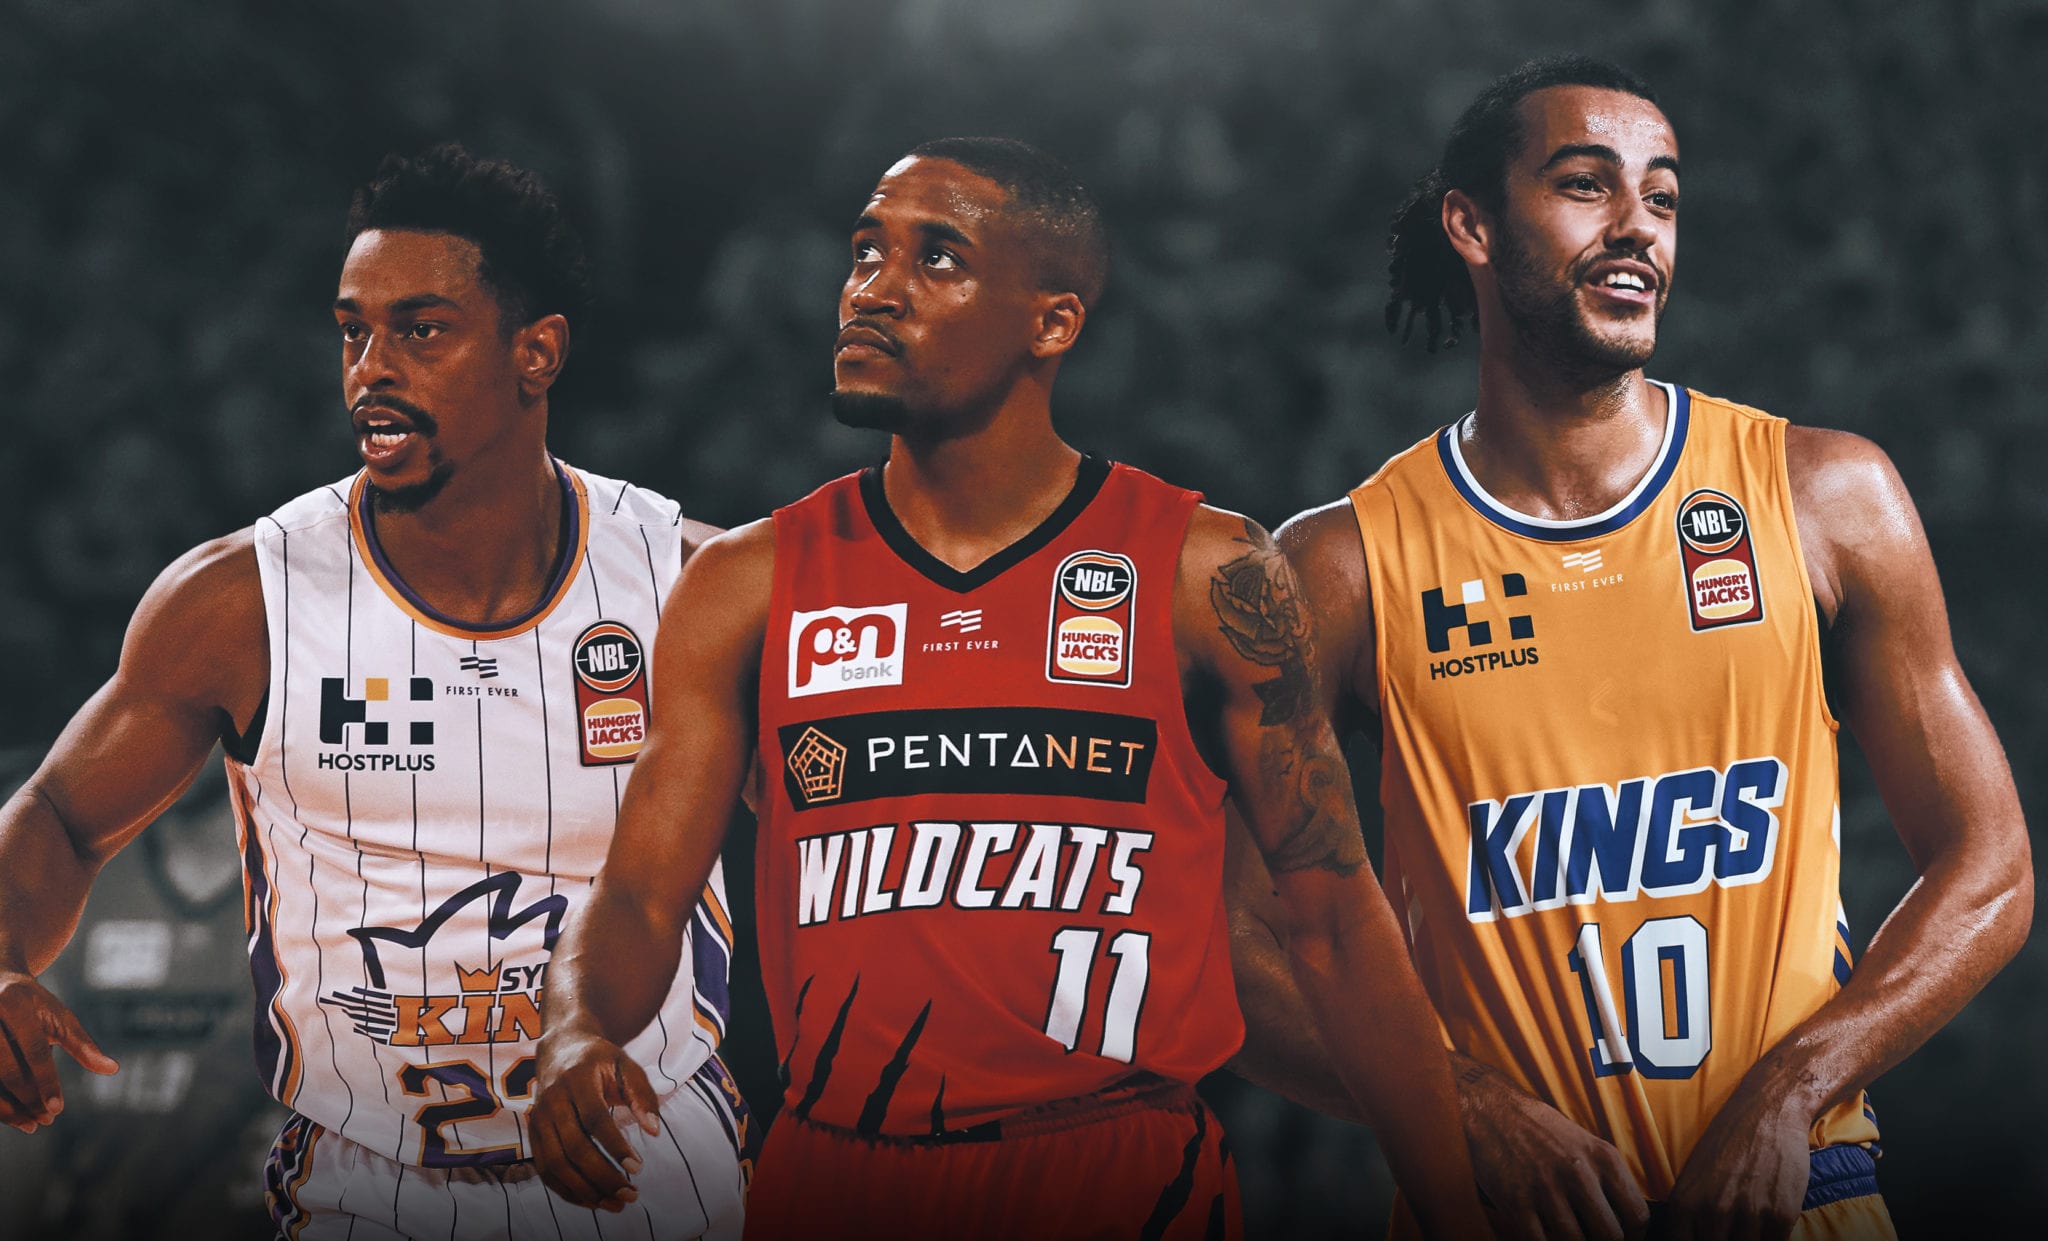 Agent Says Players’ Association Failed NBL Athletes with Historically Bad Deal